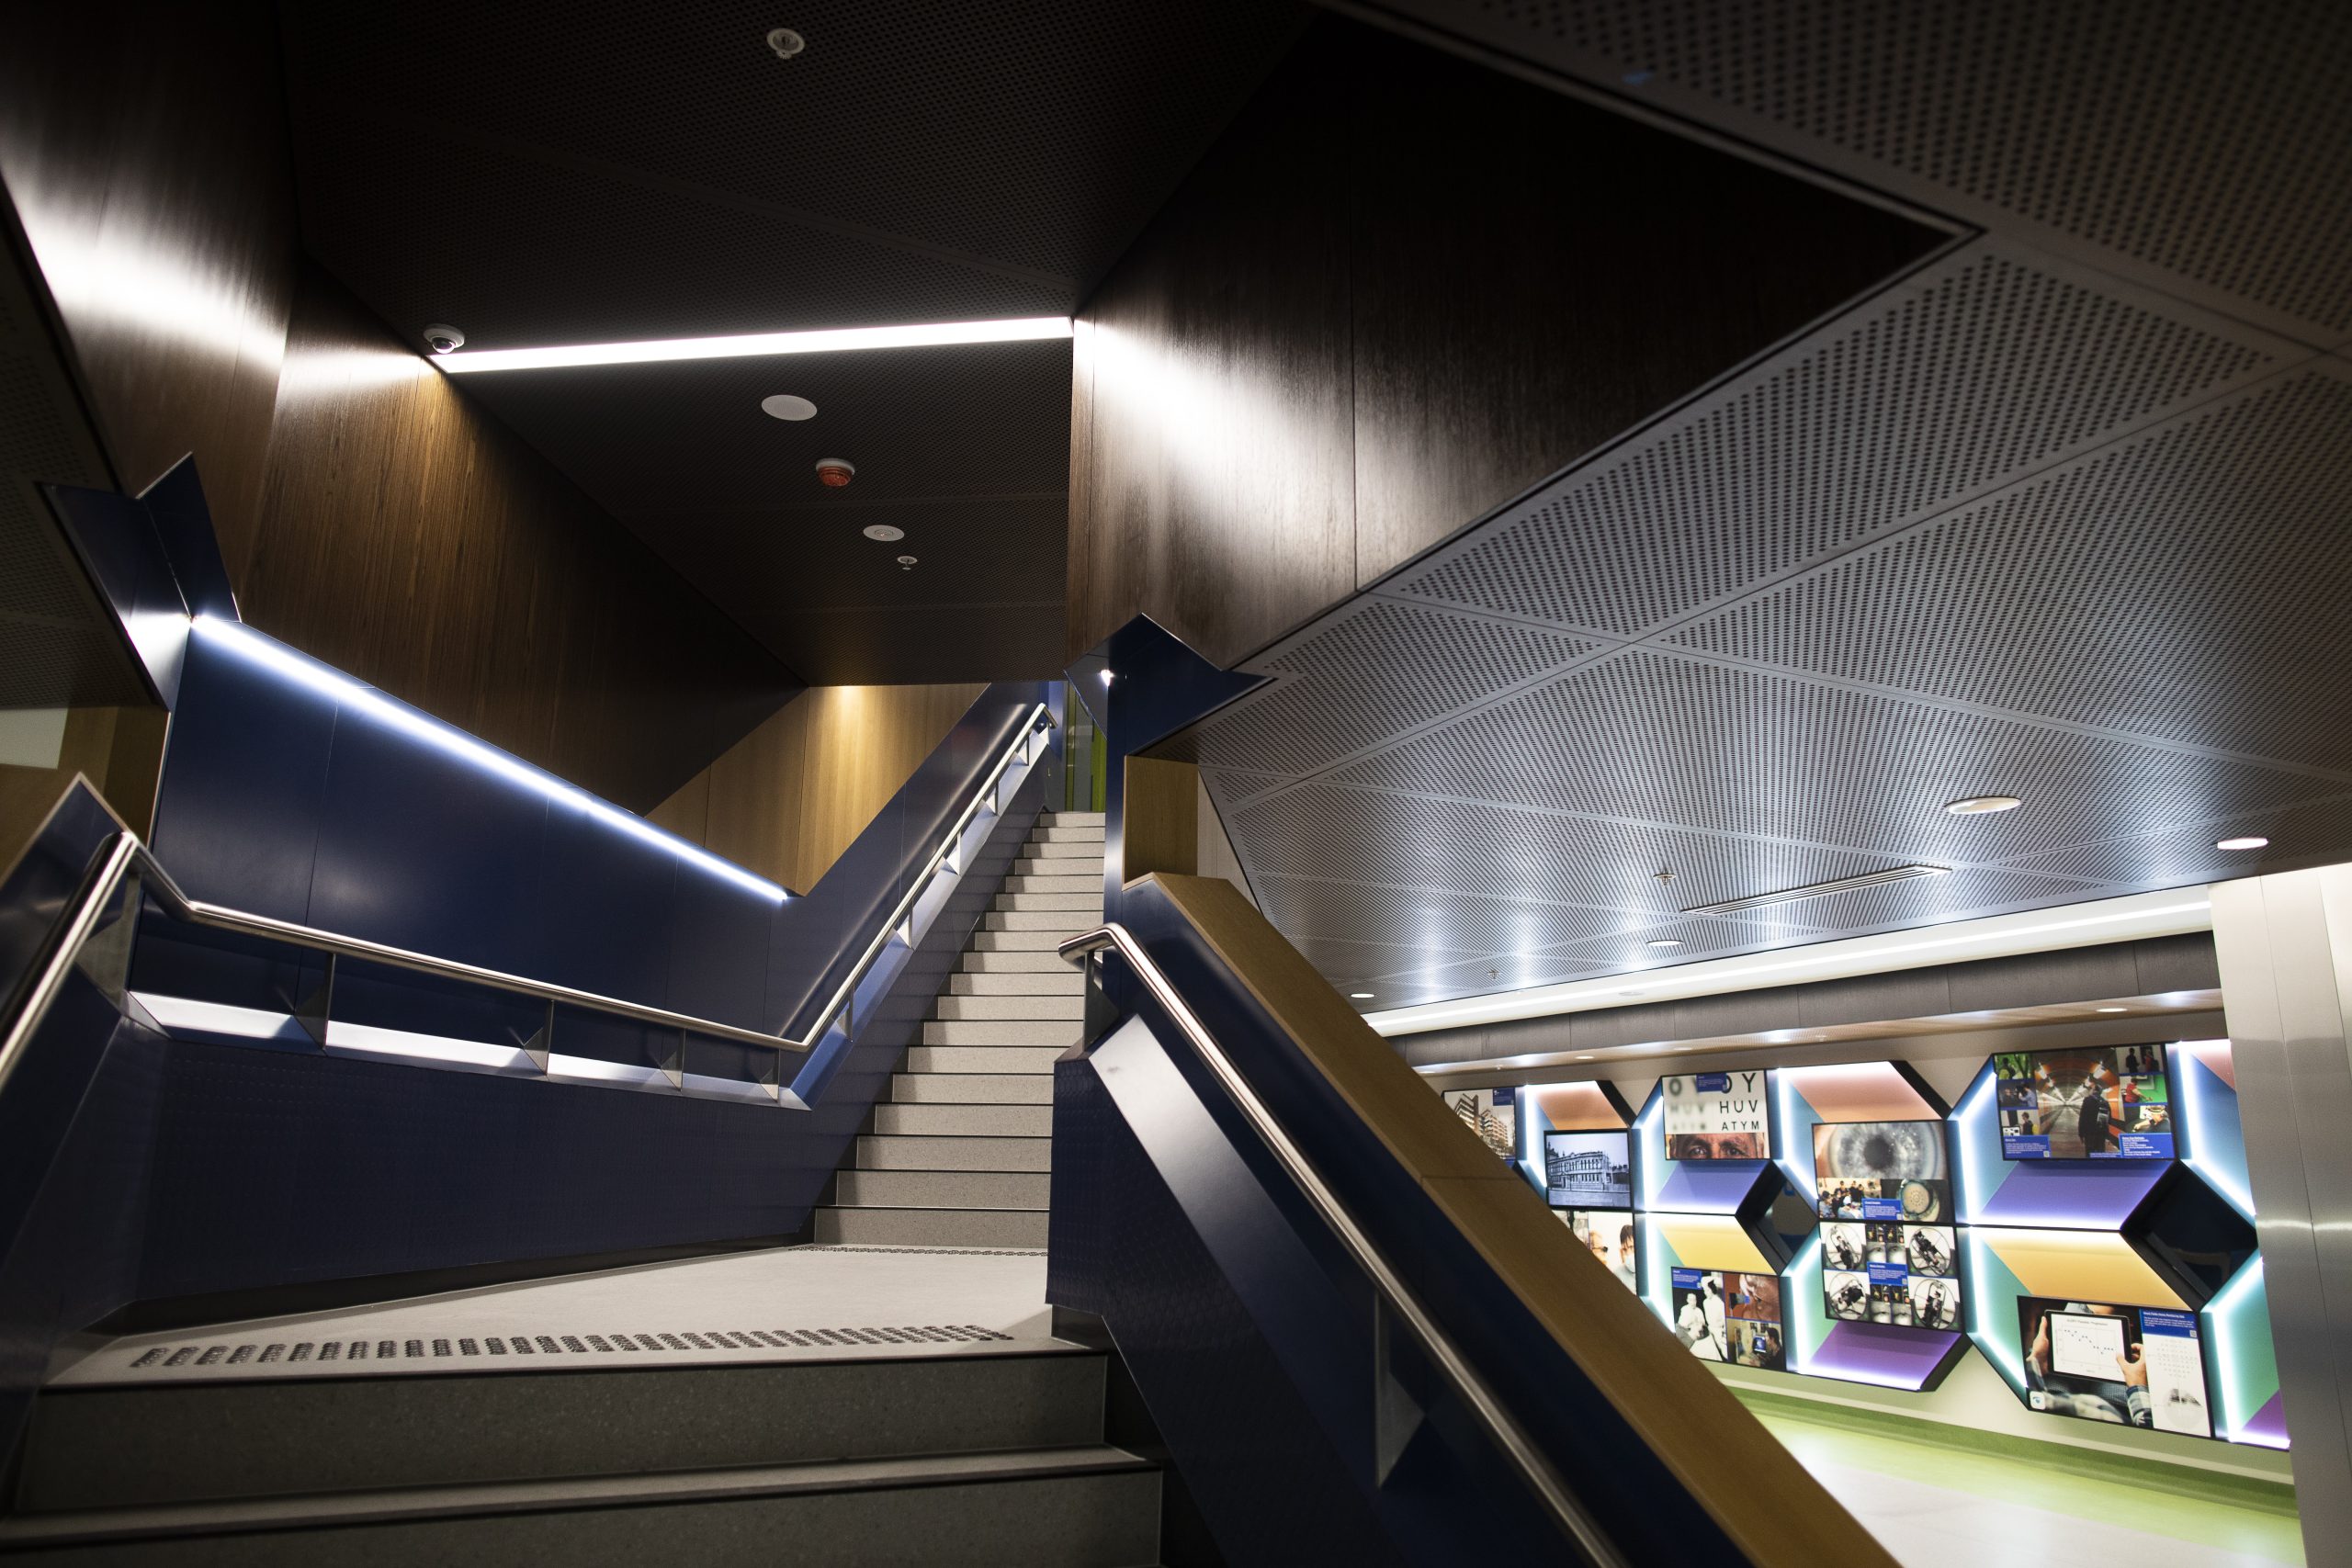 Image of our Ground Floor staircase leading up to Level 1 specialist clincis. In the background you can see the colourful history wall that adorns the walkaway